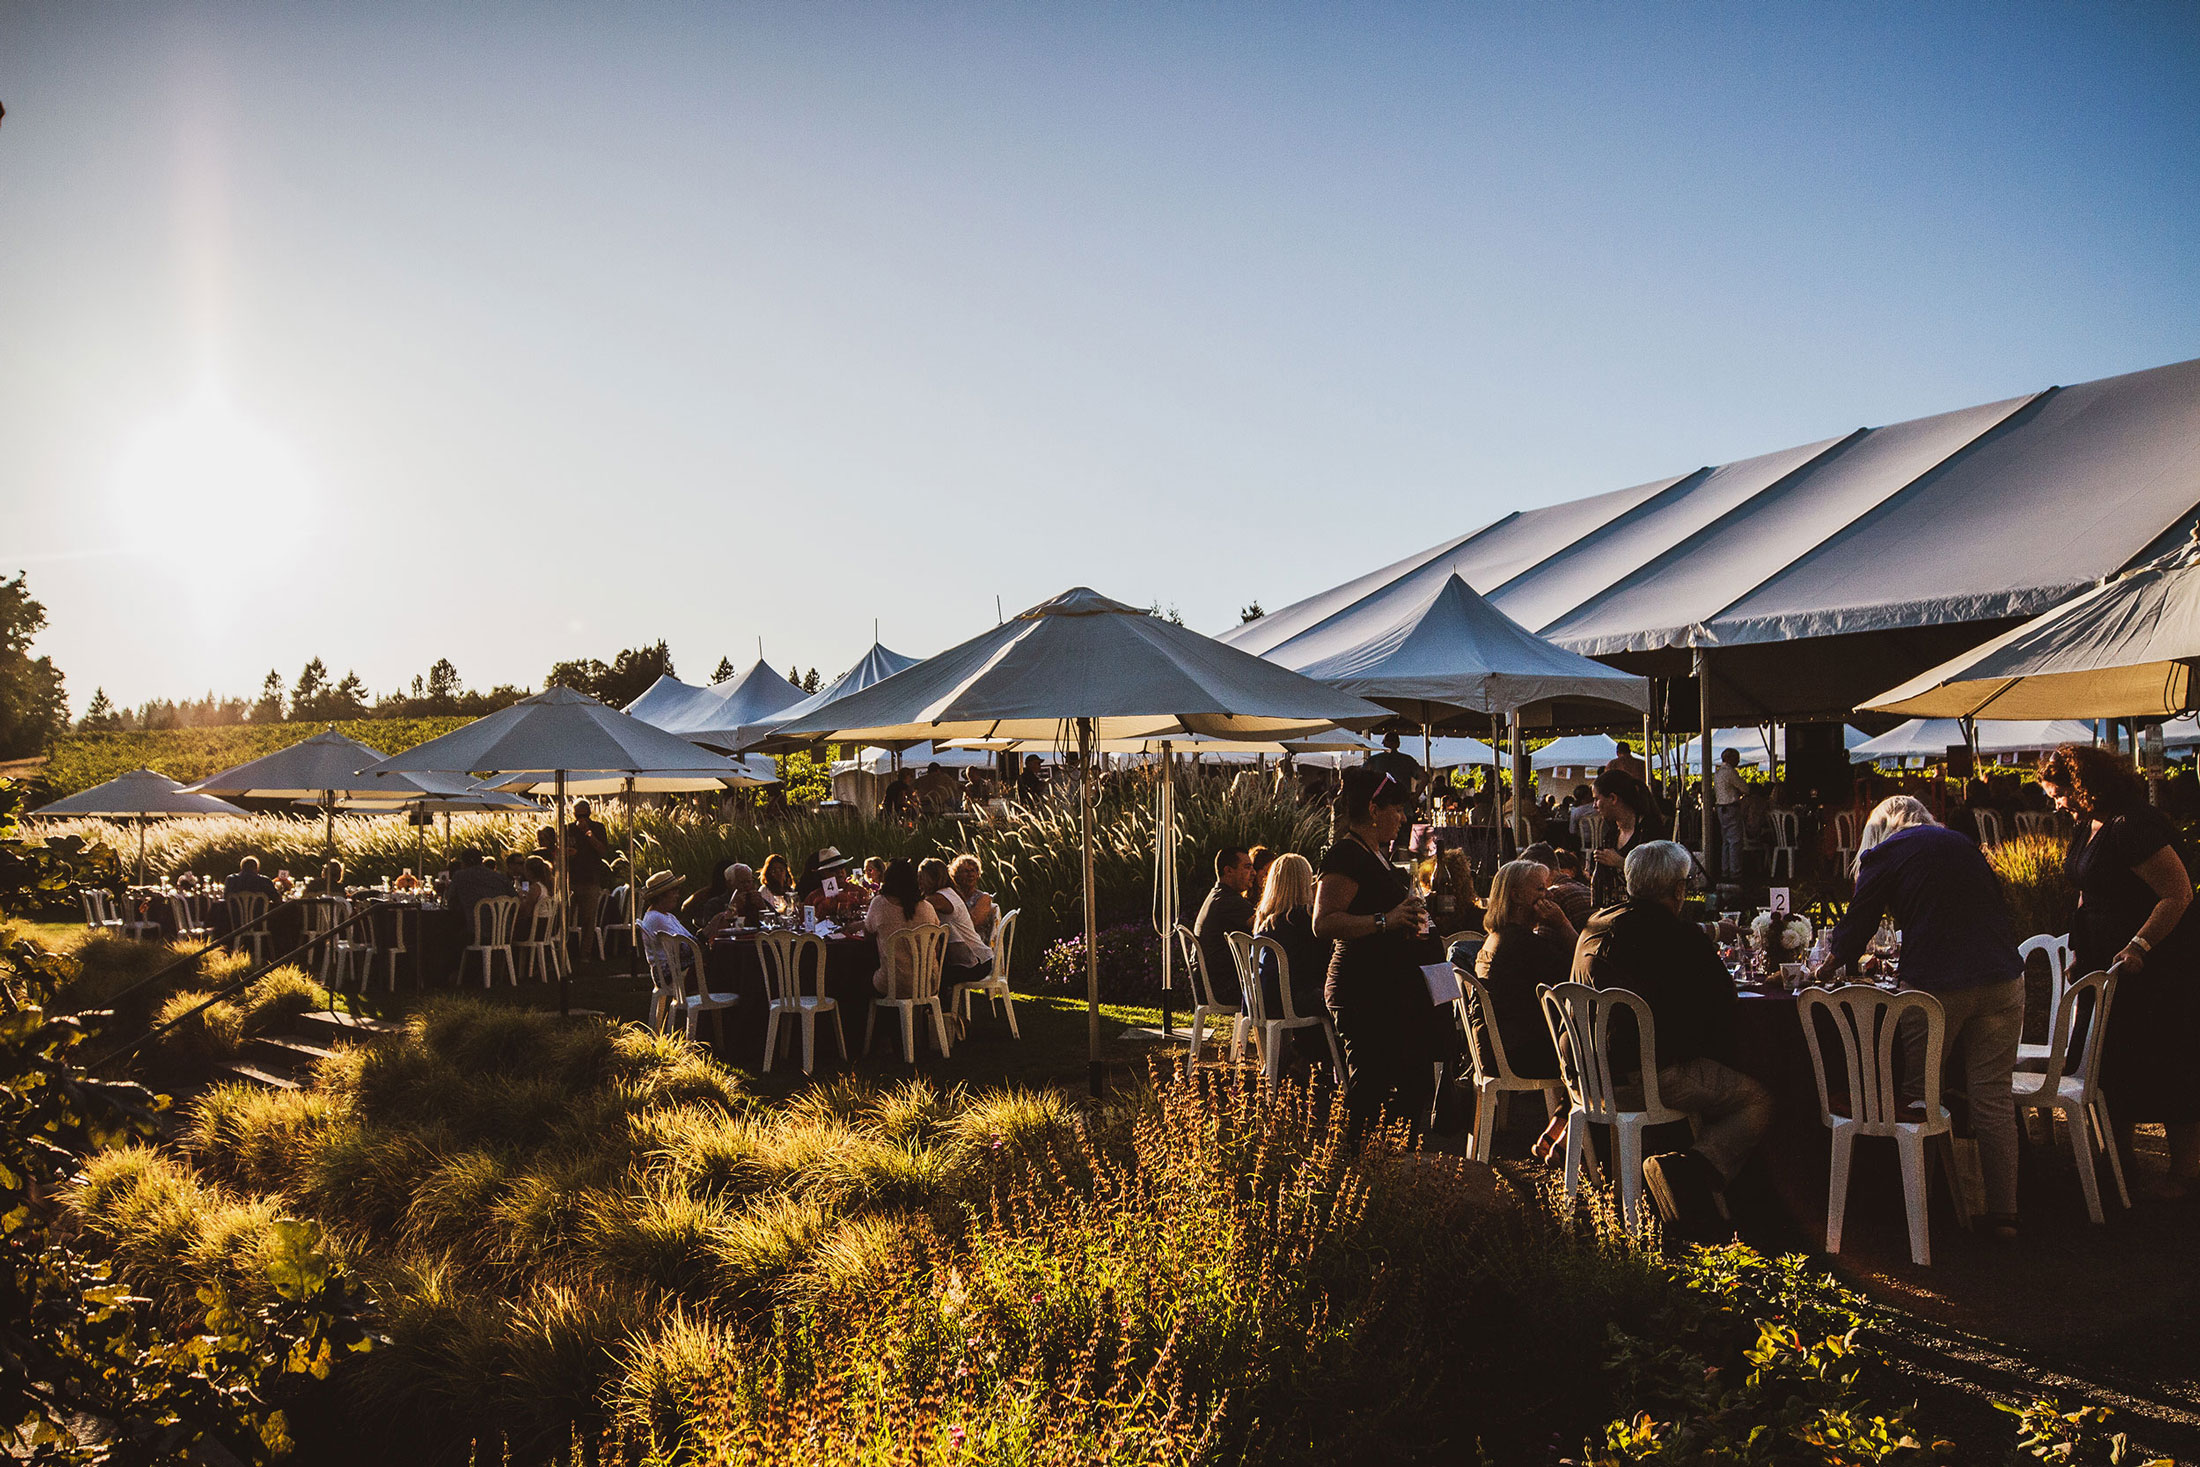 Outdoor festival at the edge of the vineyard under umbrellas